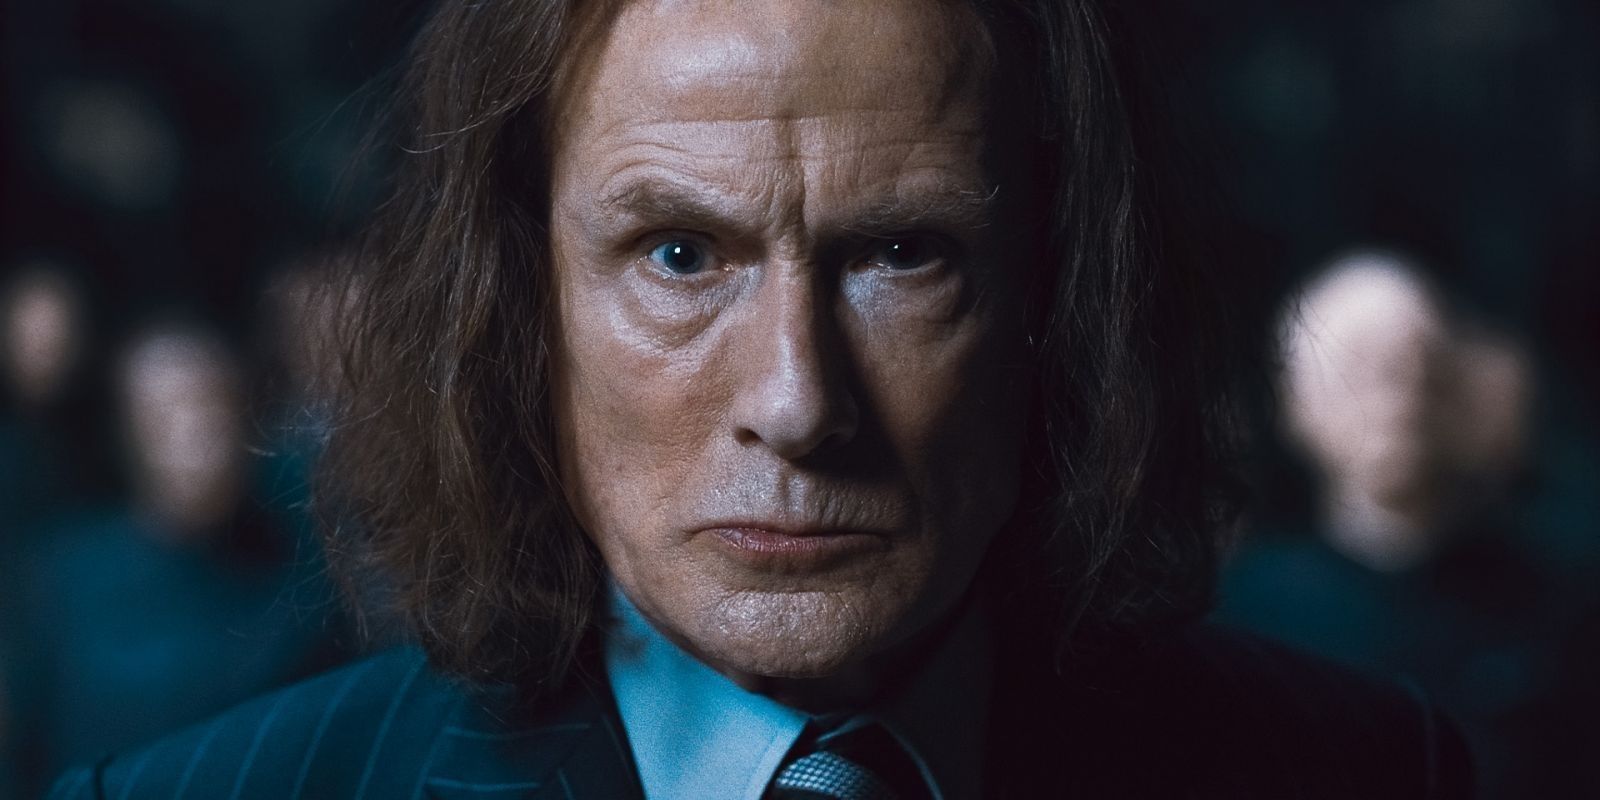 Billy Nighy as Rufus Scrimgeour in Harry Potter and the Deathly Hallows: Part I looking intense